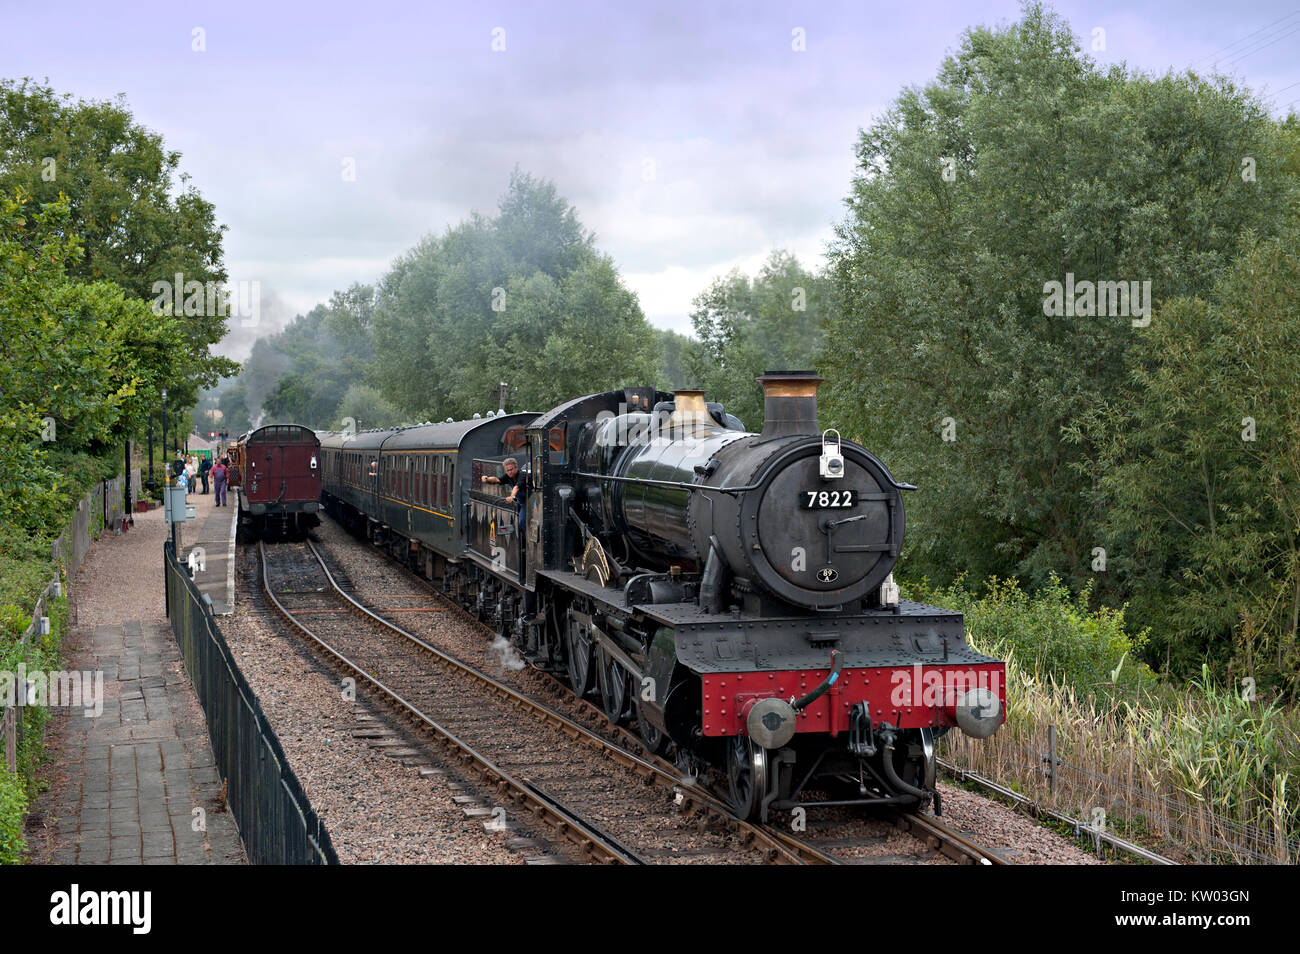 7822 'Foxcote Manor, heads a train from Tenterden passing an up train in the loop at Wittersham Road on the Kent and East Sussex Railway, UK Stock Photo